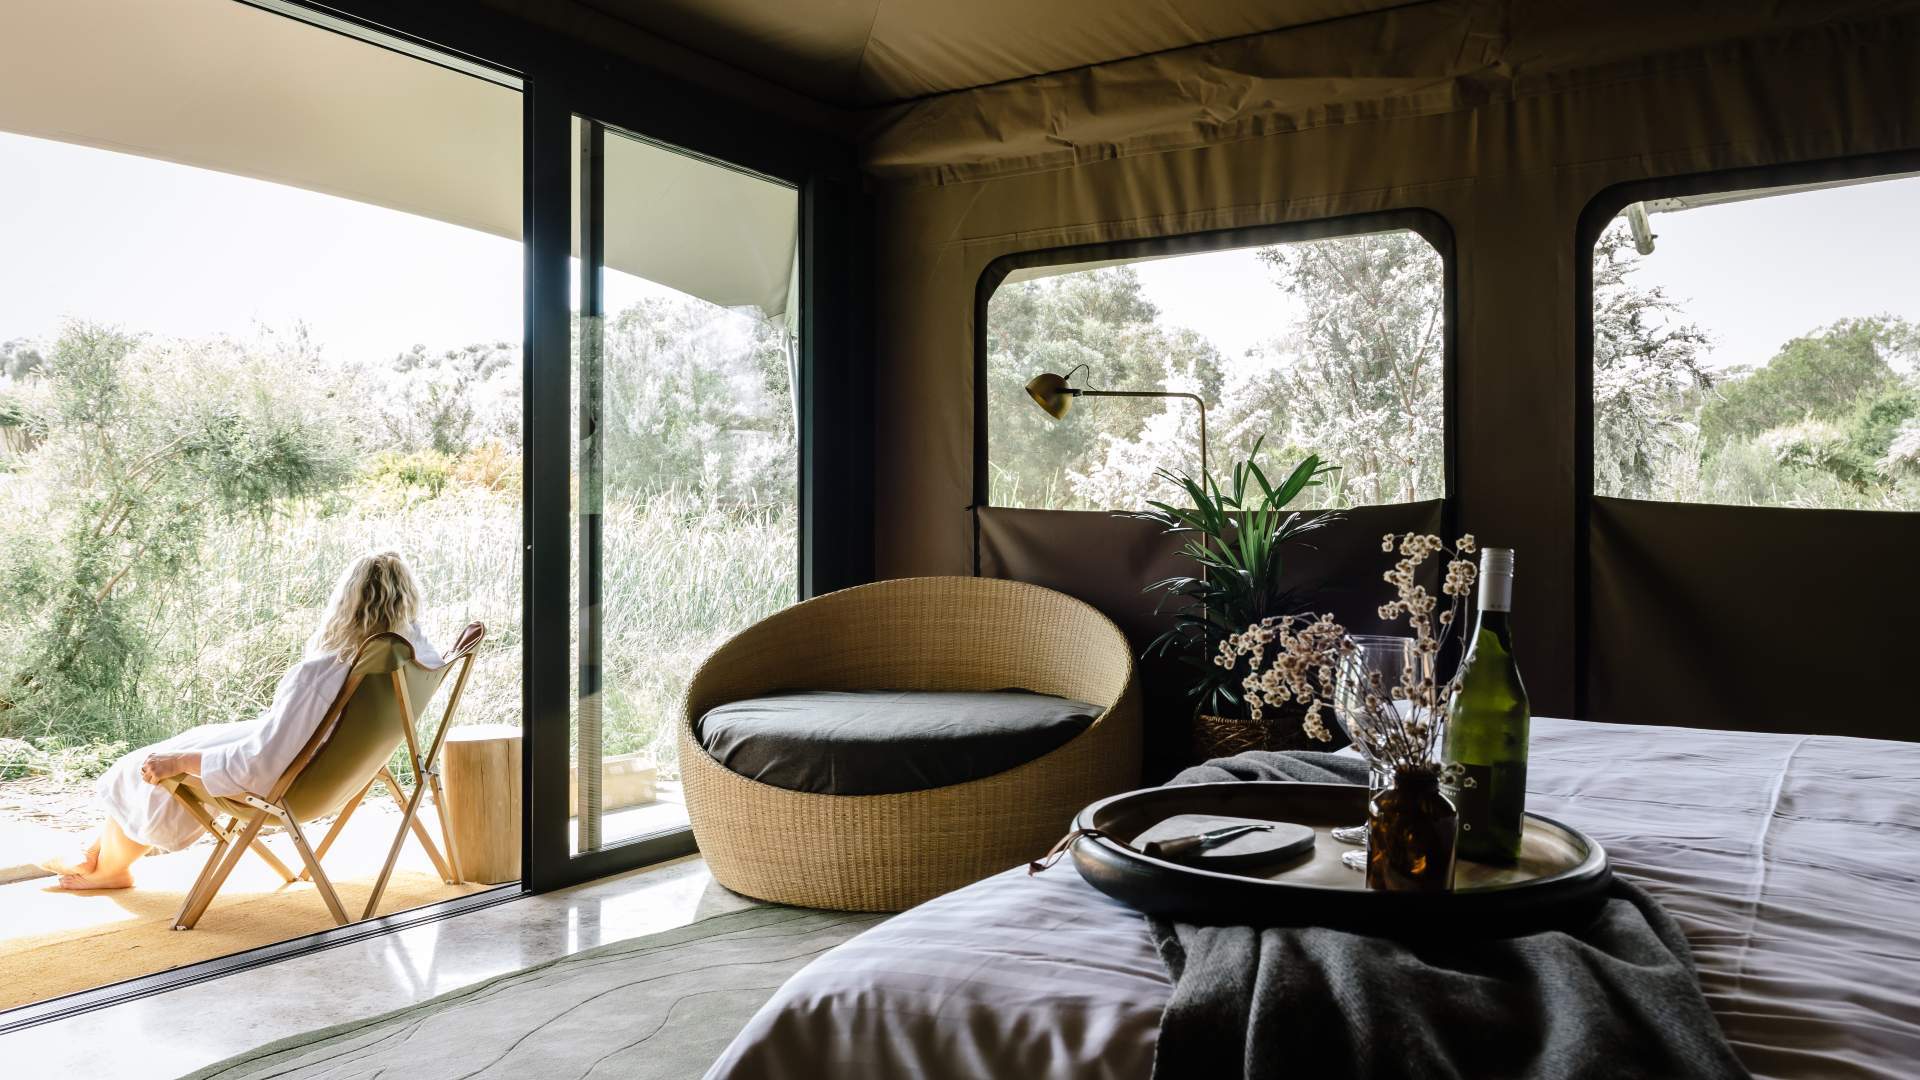 Glamping Victoria Melbourne - THE PENINSULA HOT SPRINGS, FINGAL